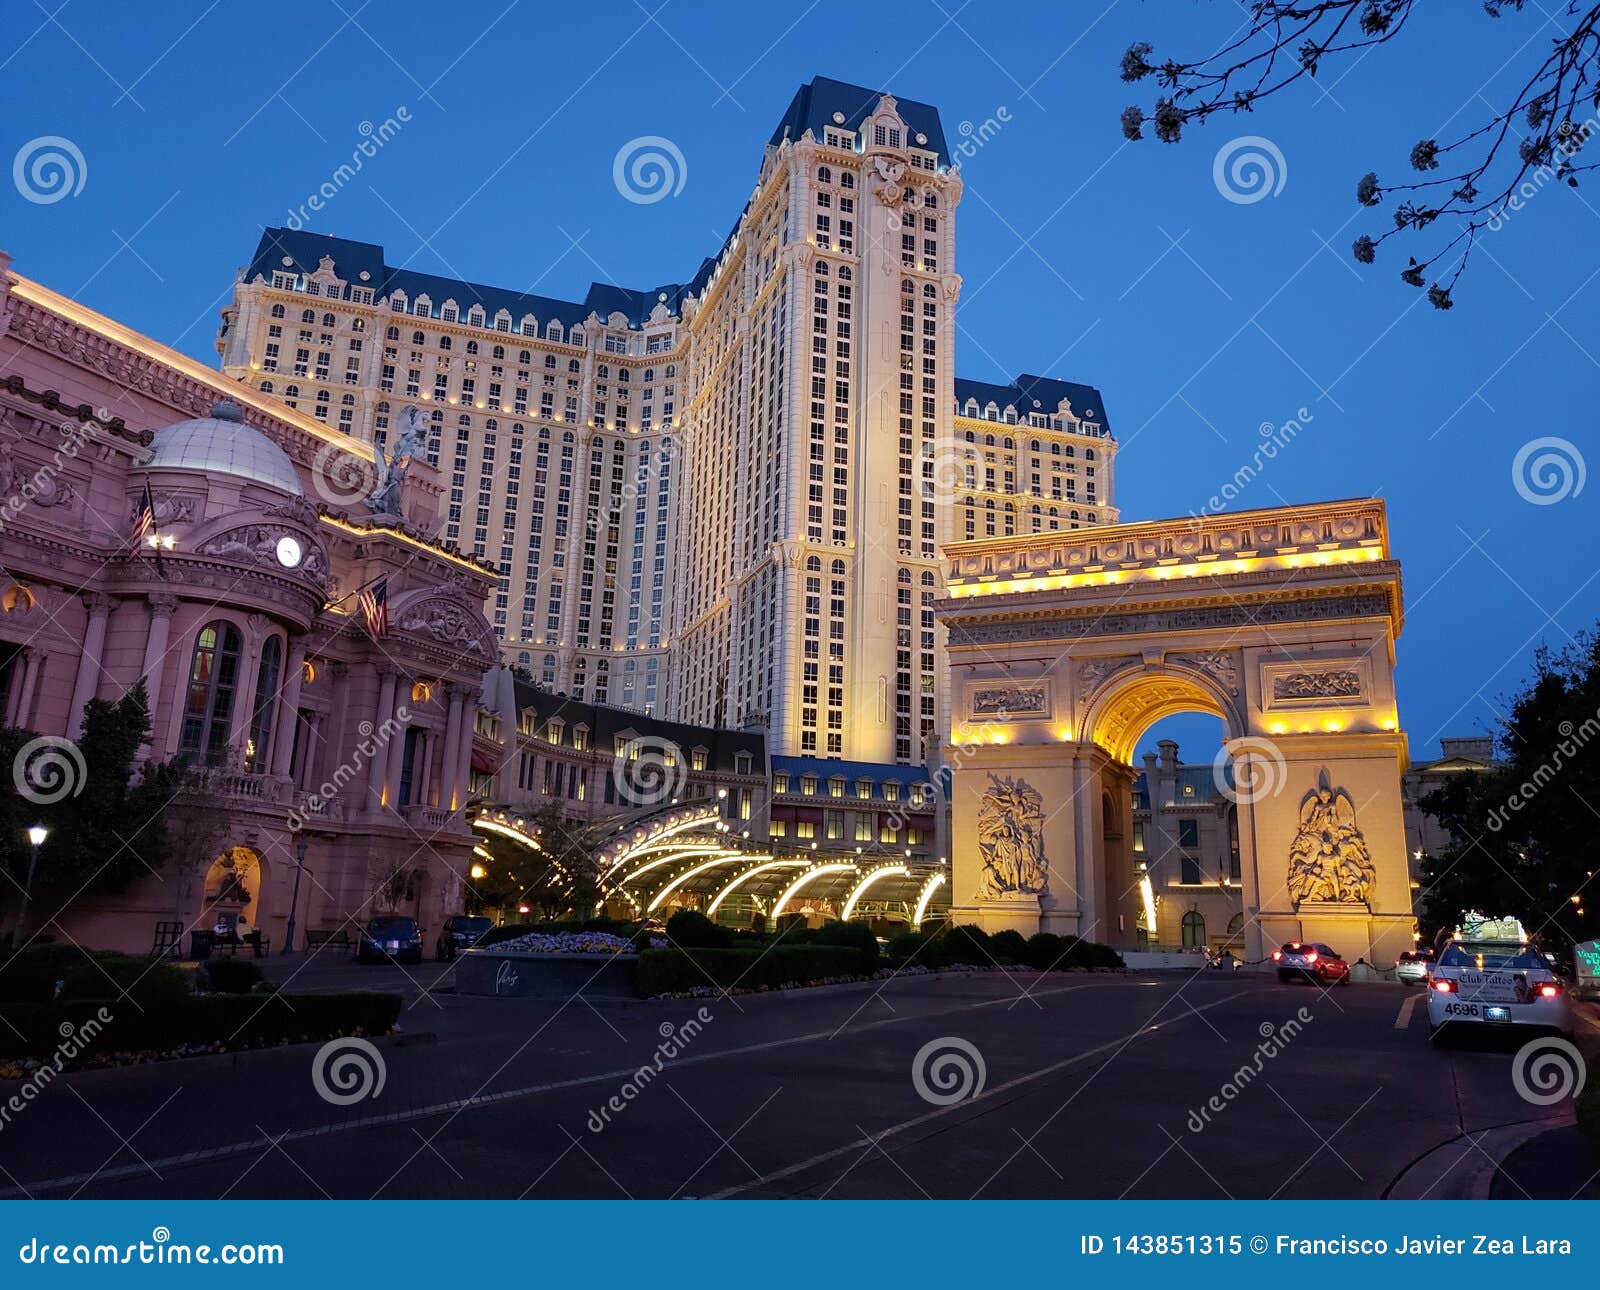 Las Vegas City View with Paris Hotel in front in Nevada image